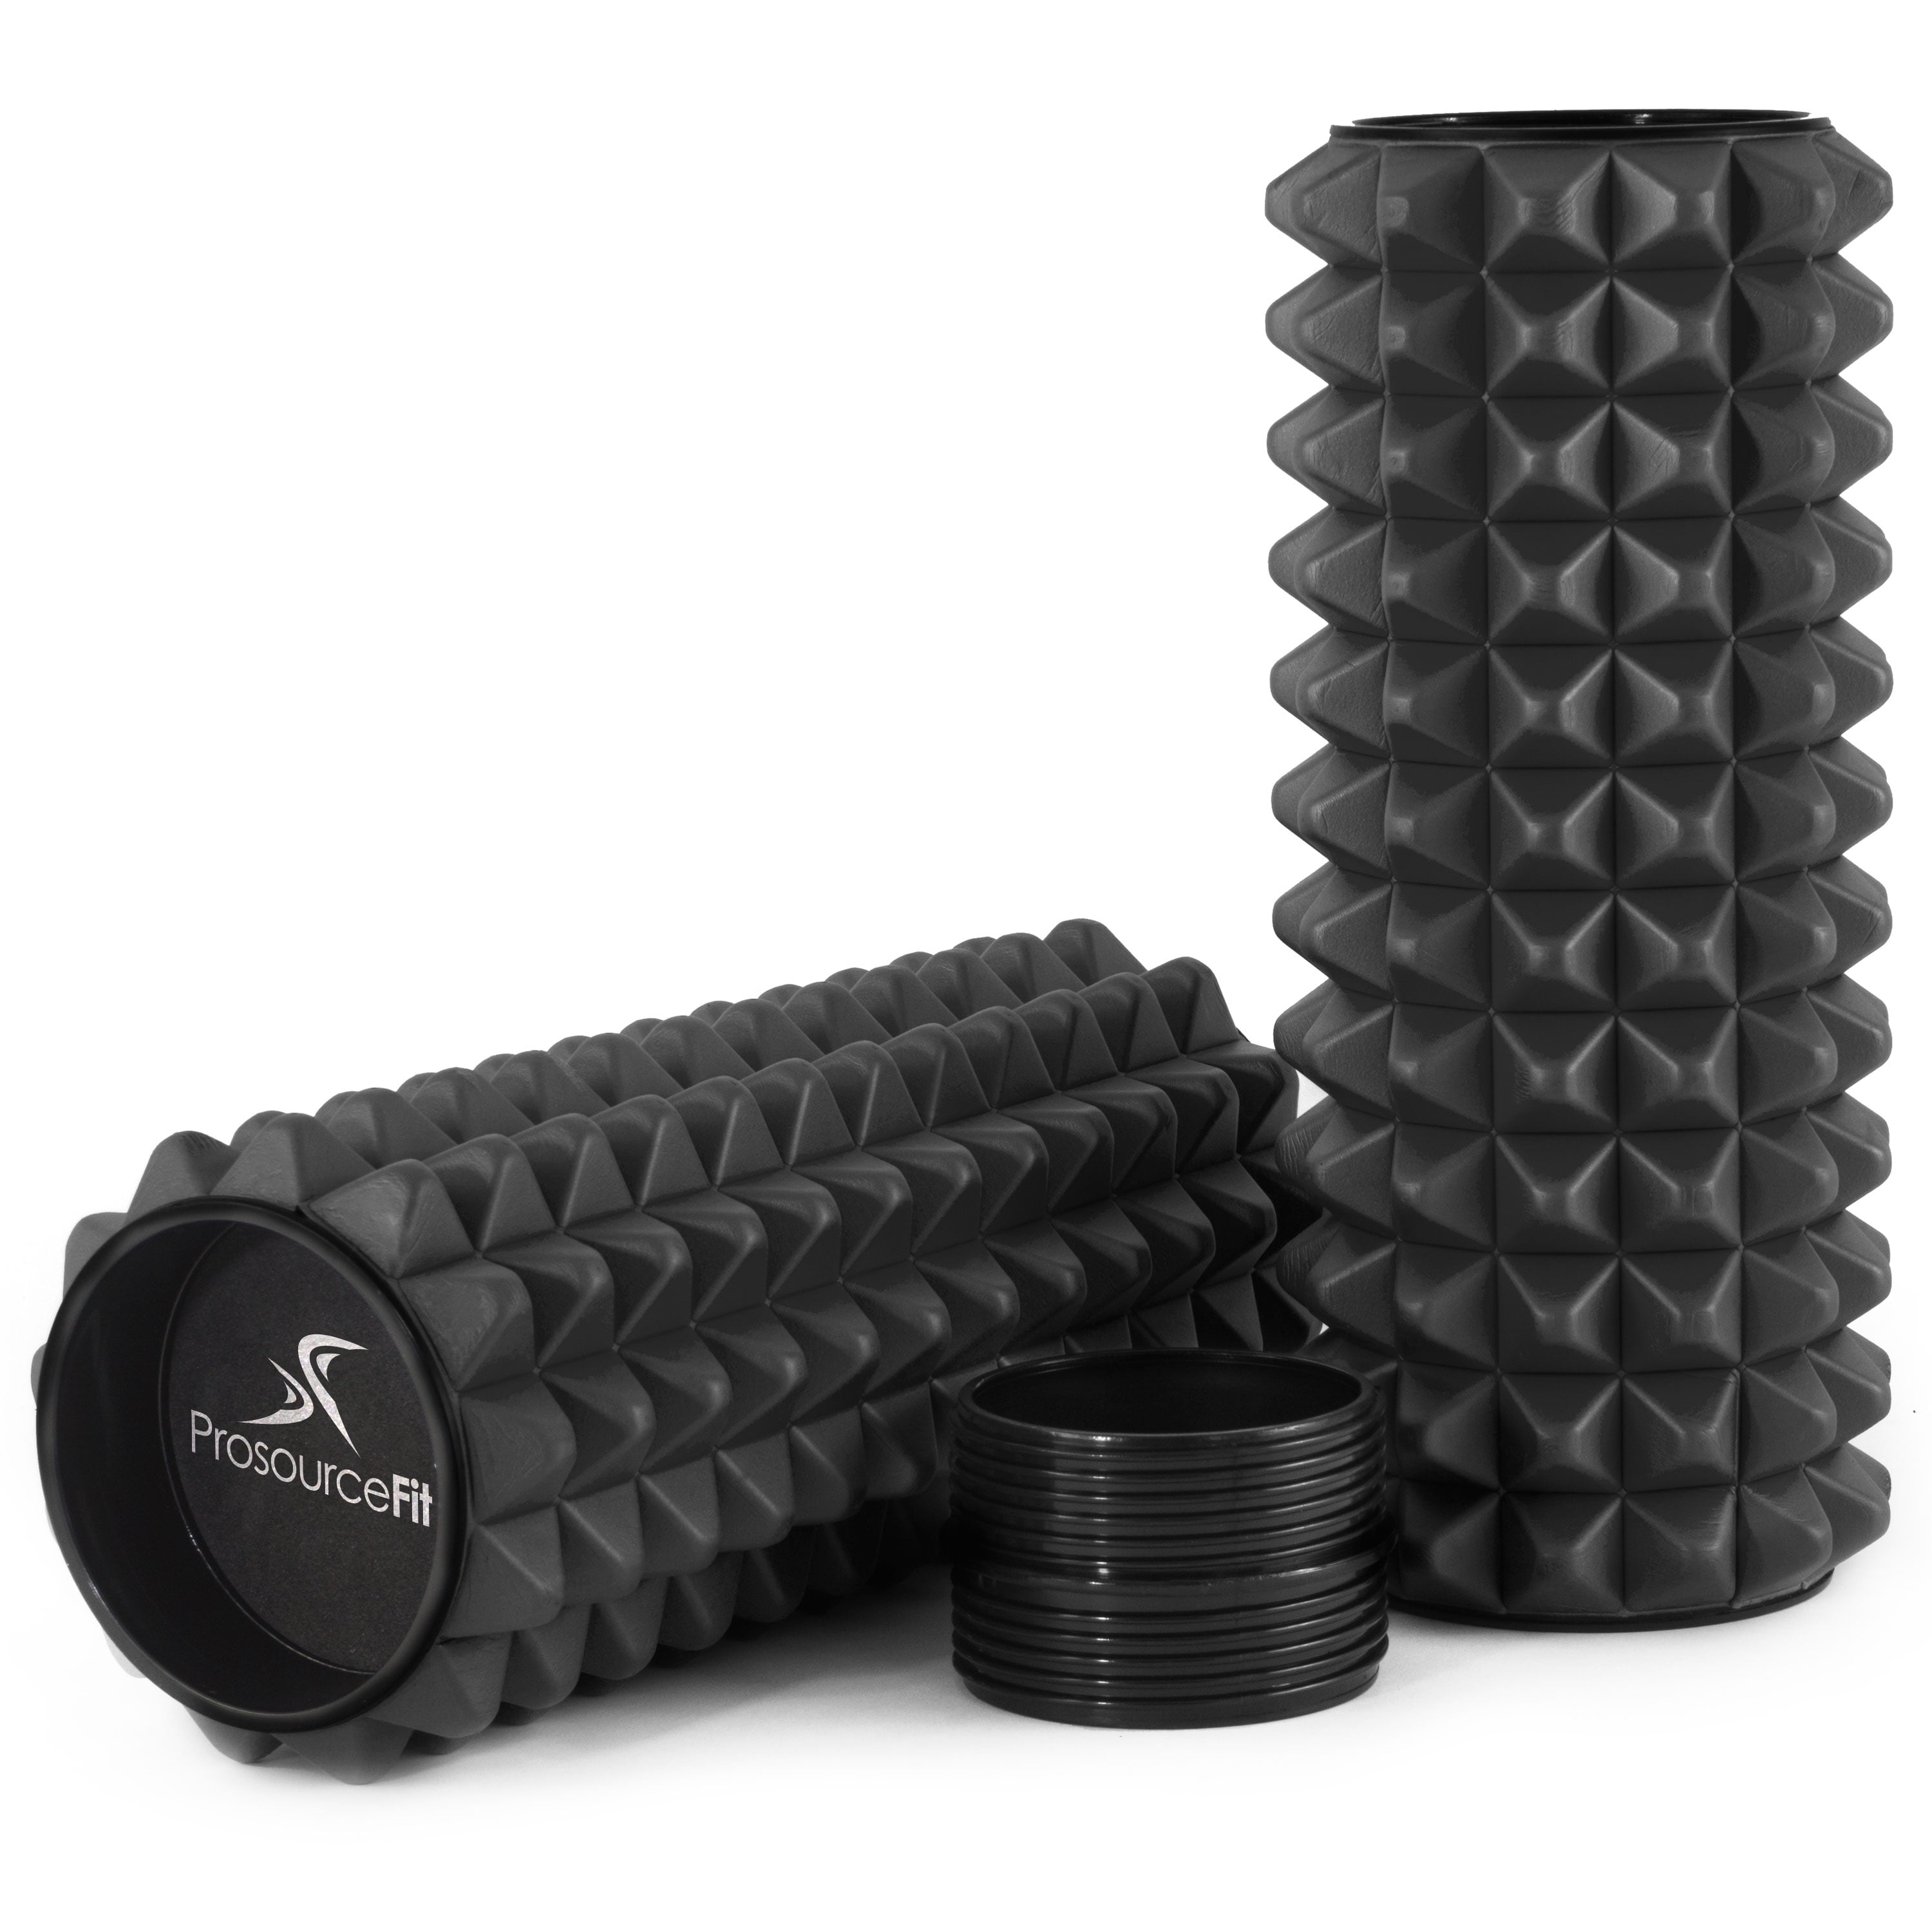 12/”//24/” ProSource Premium Spike Bumps 2-in-1 Sports Massage Foam Roller 33//60 cm for Muscle Trigger Point Release Multiple Colors